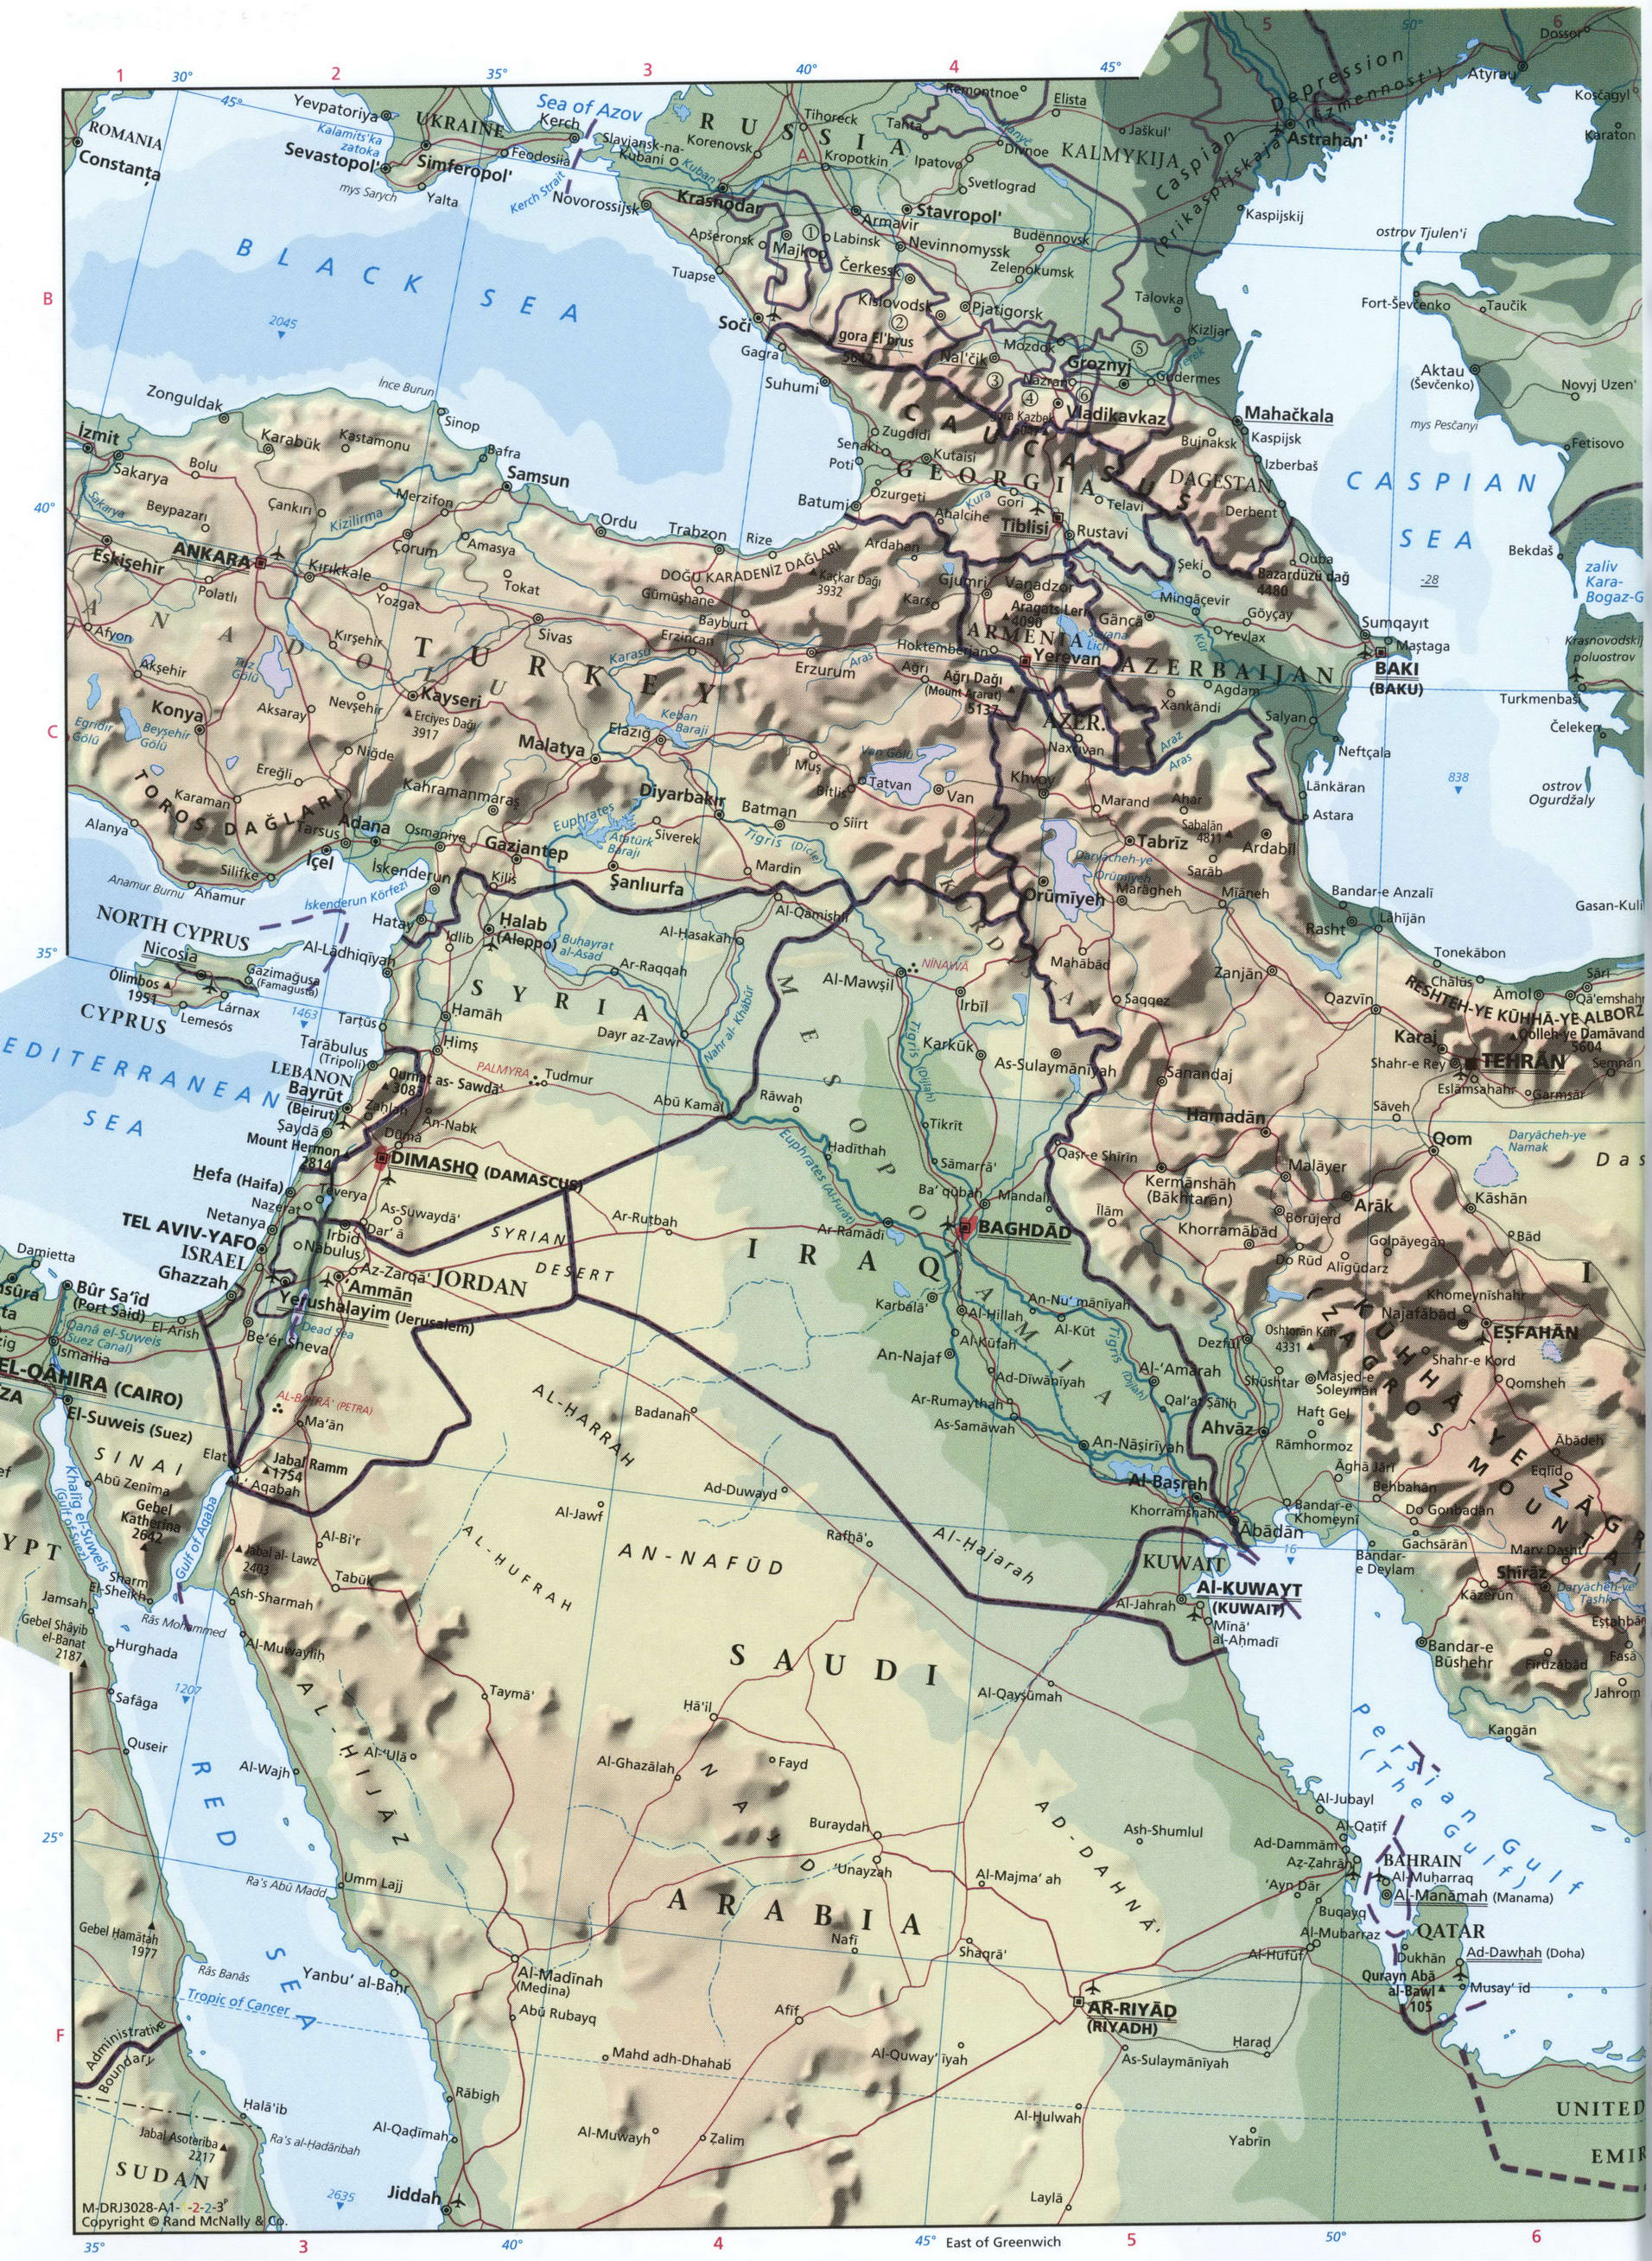 The Middle East map